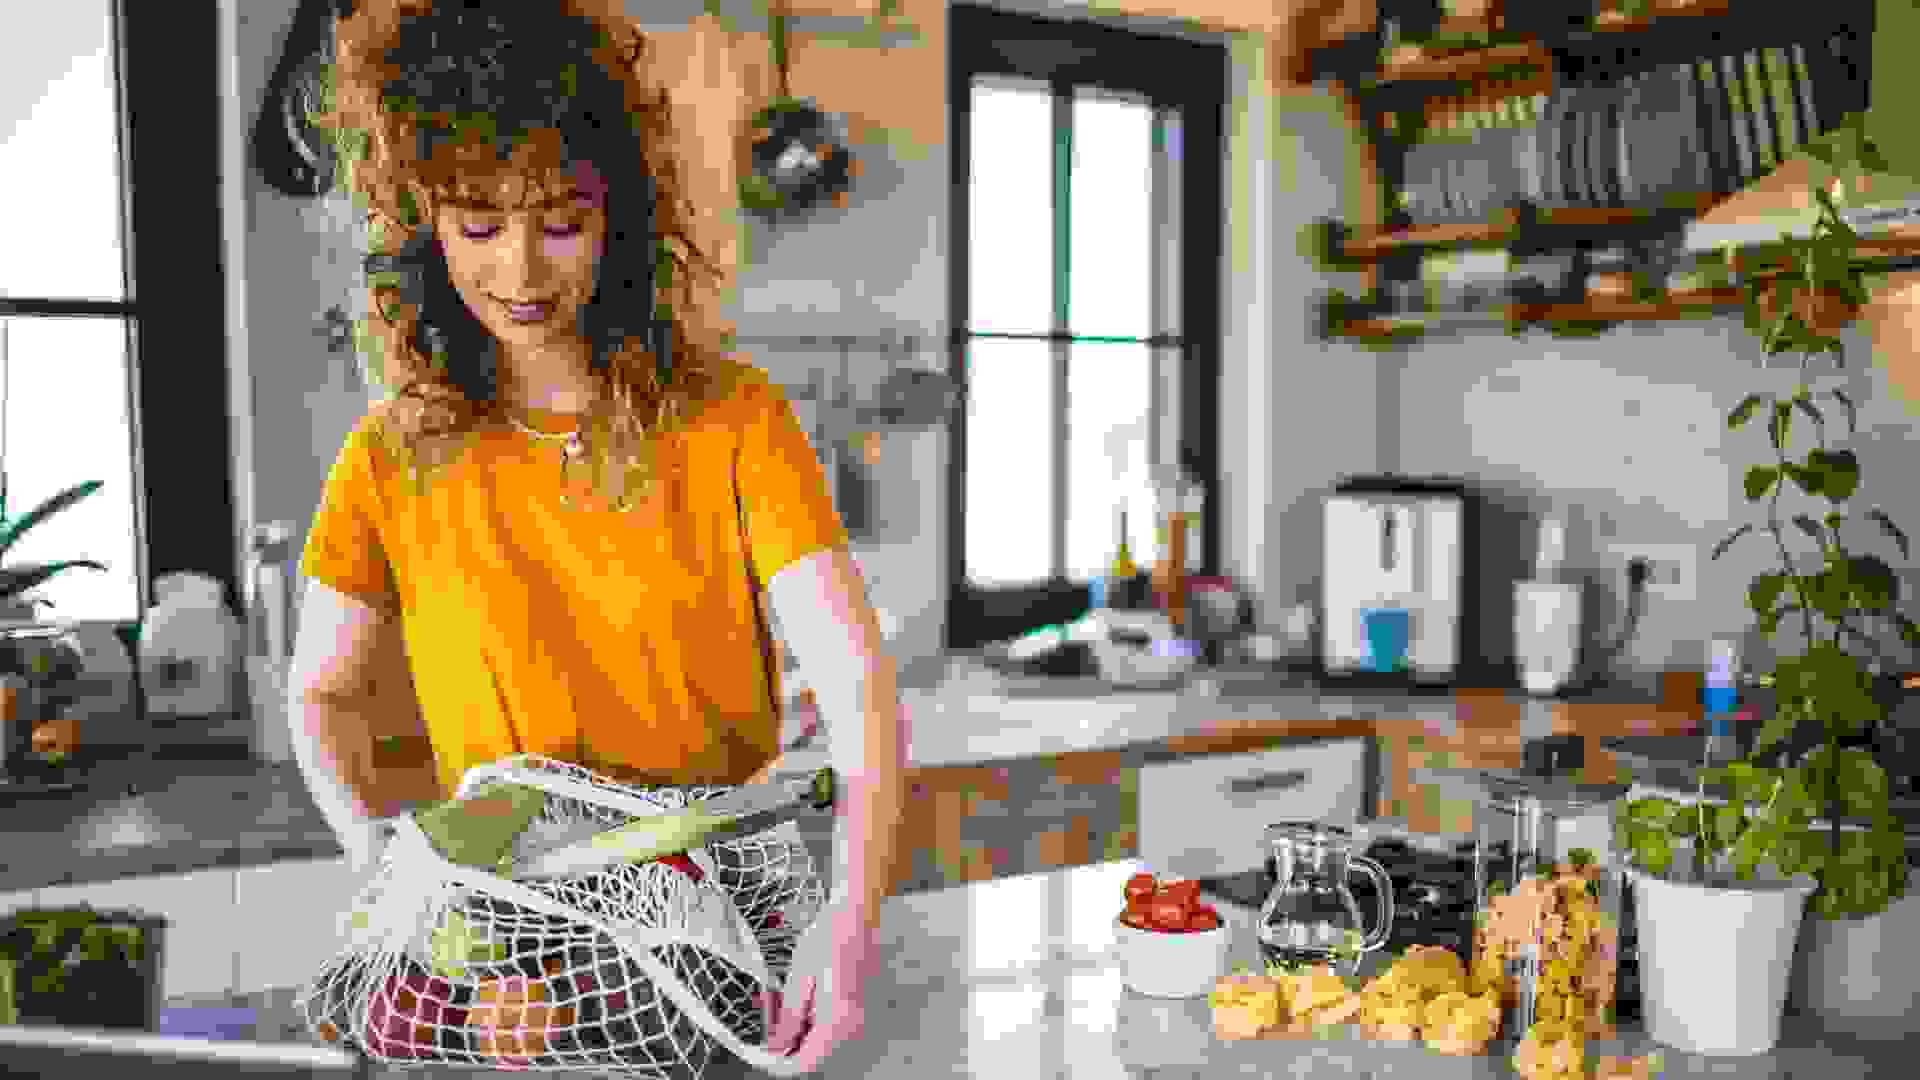 Woman coming home with shopping bag full of fresh food stock photo